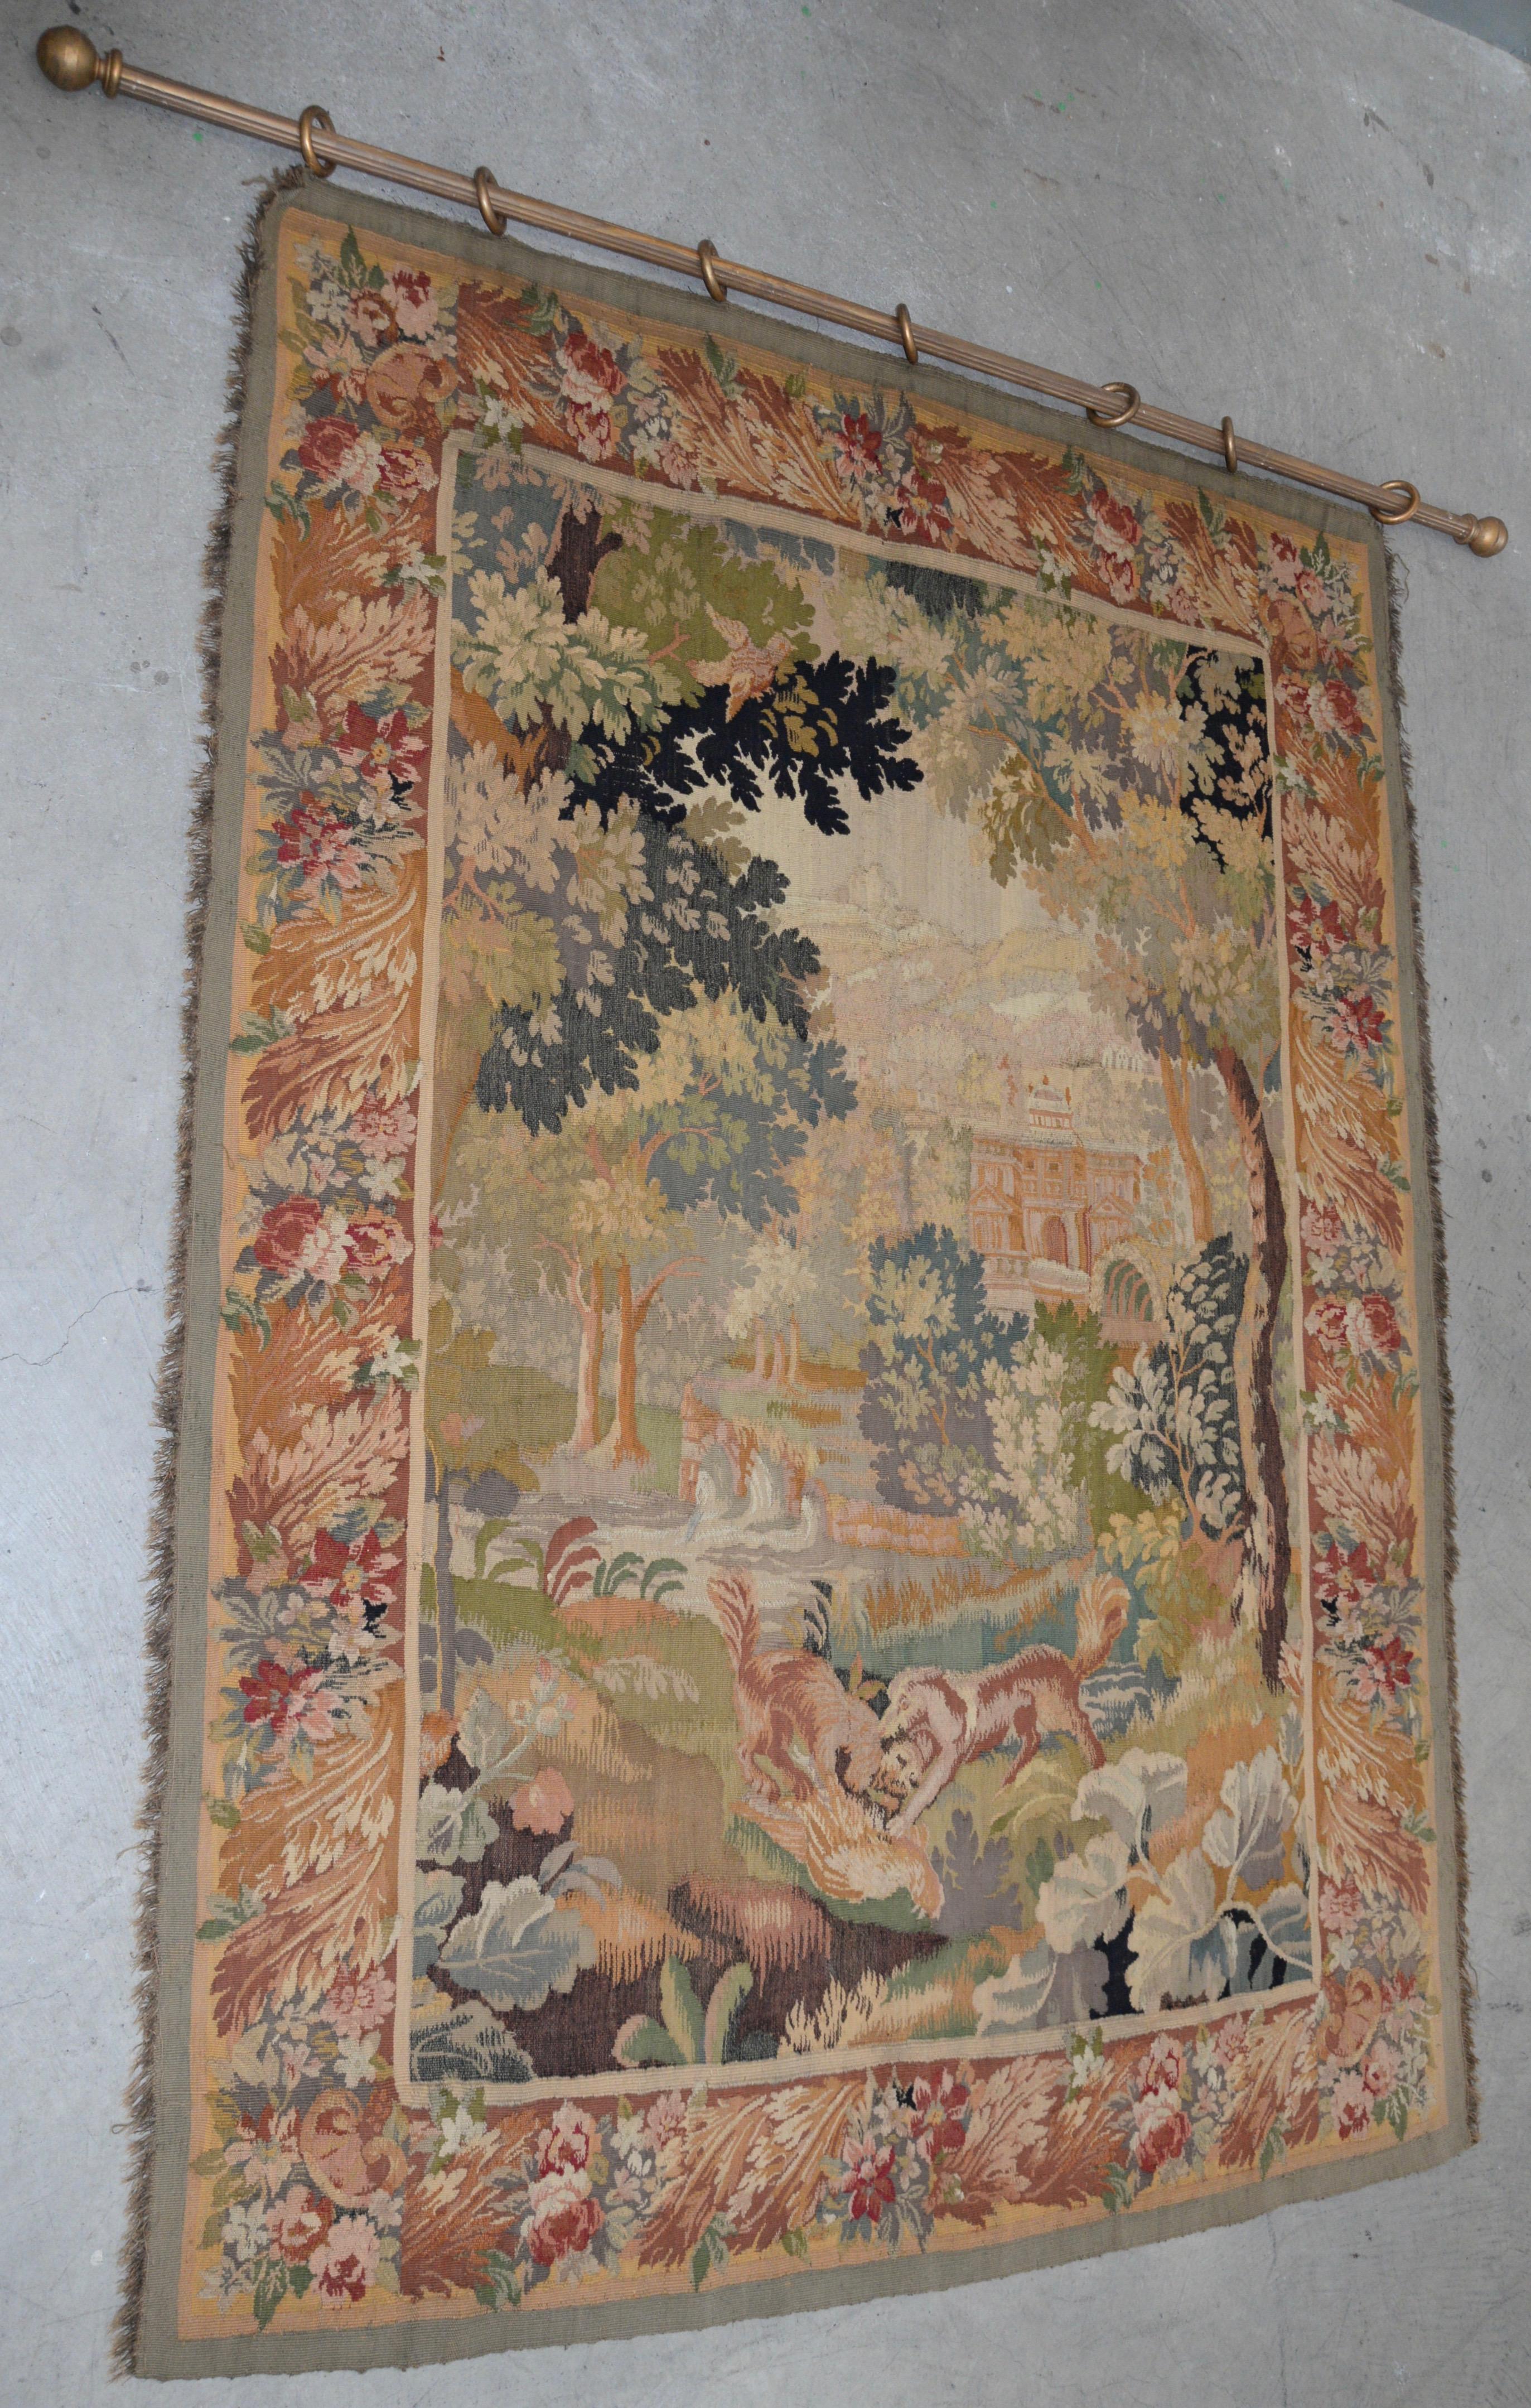 Fine antique European Tapestry depicting a country scene with dogs

This is a large 19th century tapestry. The background of the tapestry shows a mountain village with a large palace and smaller homes on the hillsides. The foreground of the